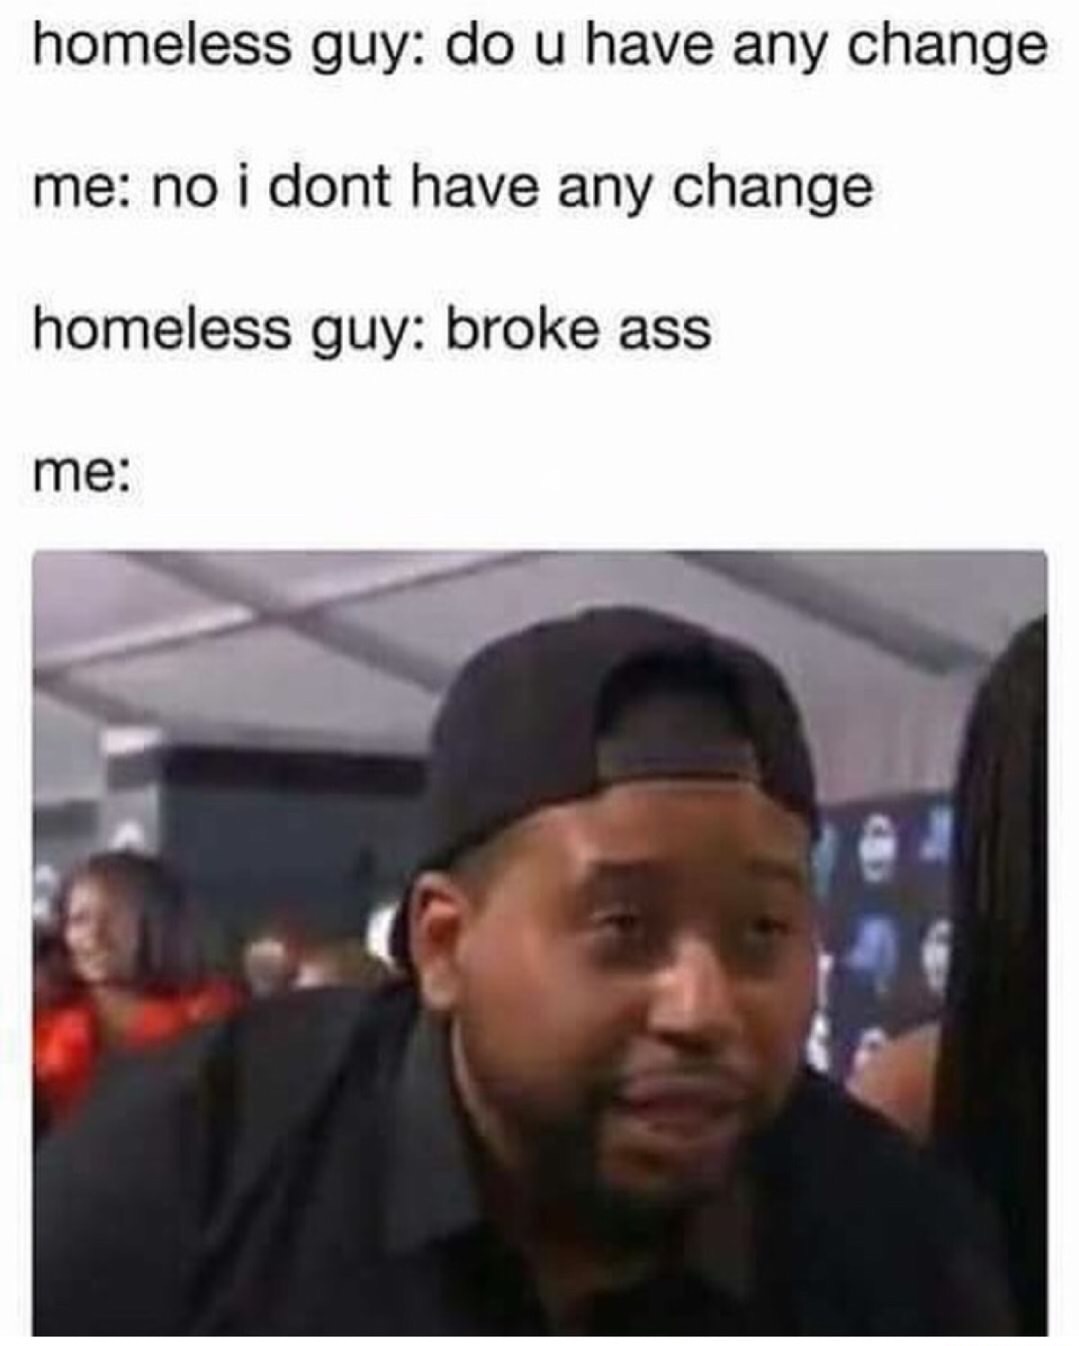 edgy meme of huh what d you say - homeless guy do u have any change me no i dont have any change homeless guy broke ass me